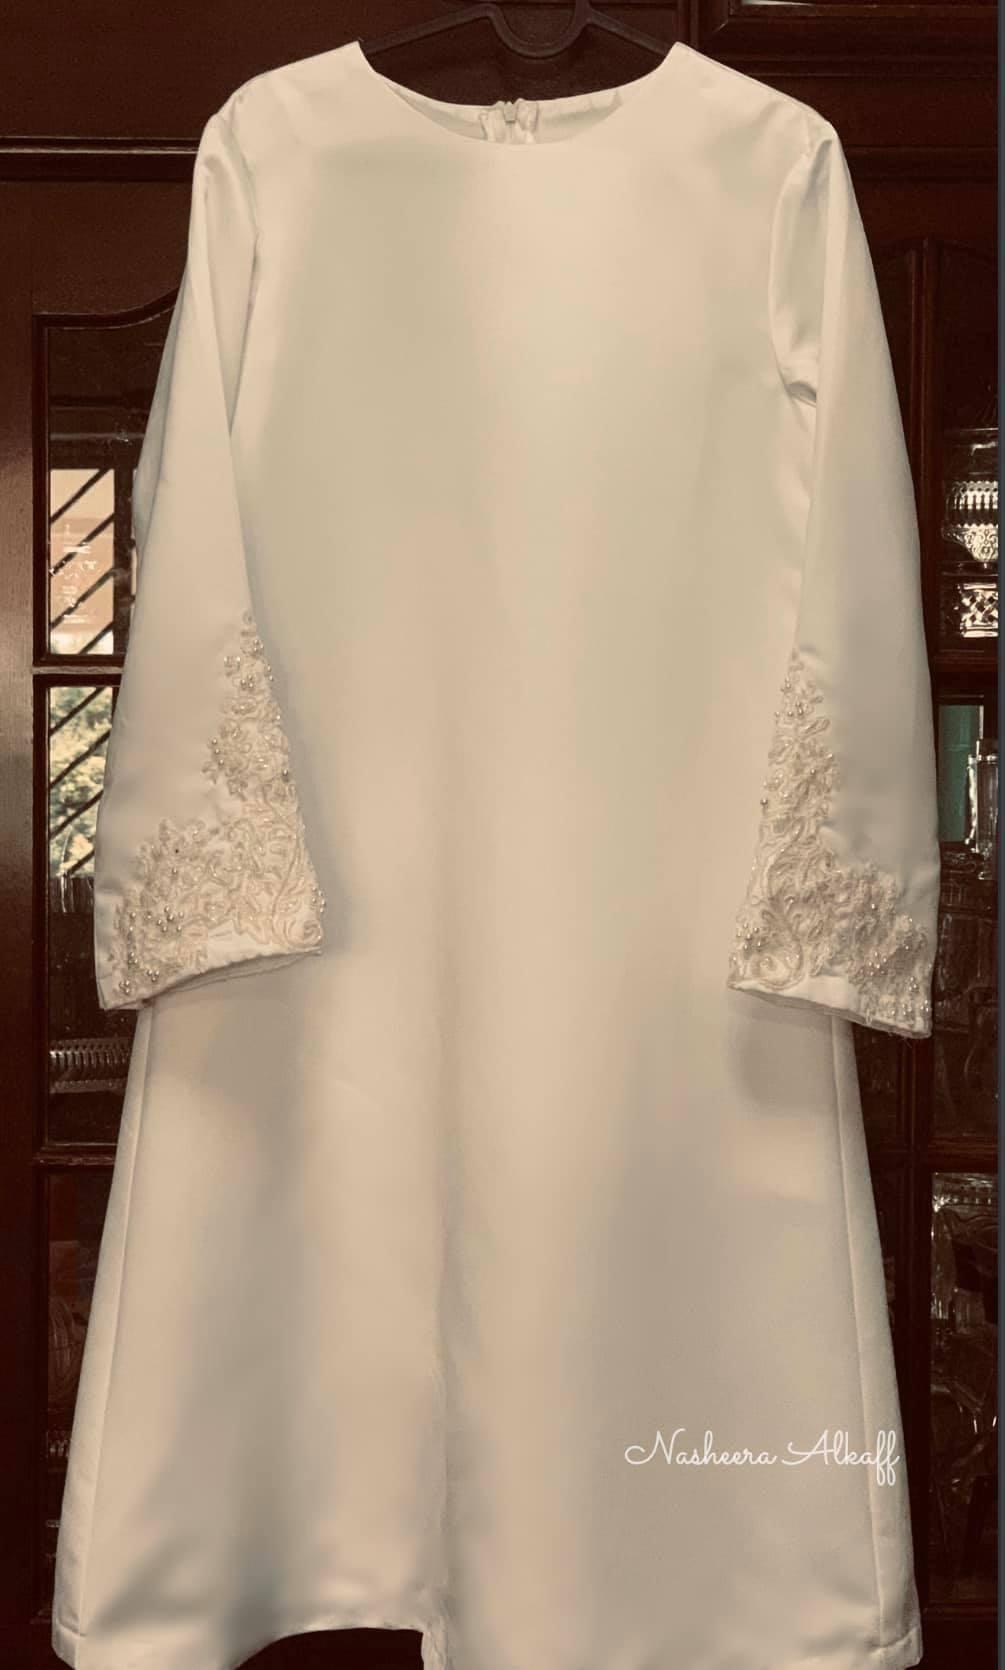 Baju Kurung Pahang For Akad Nikah With Veil Custom Order Xs To Xxxxxxxl Any Sizes And Colors Available Women S Fashion Muslimah Fashion Dresses On Carousell